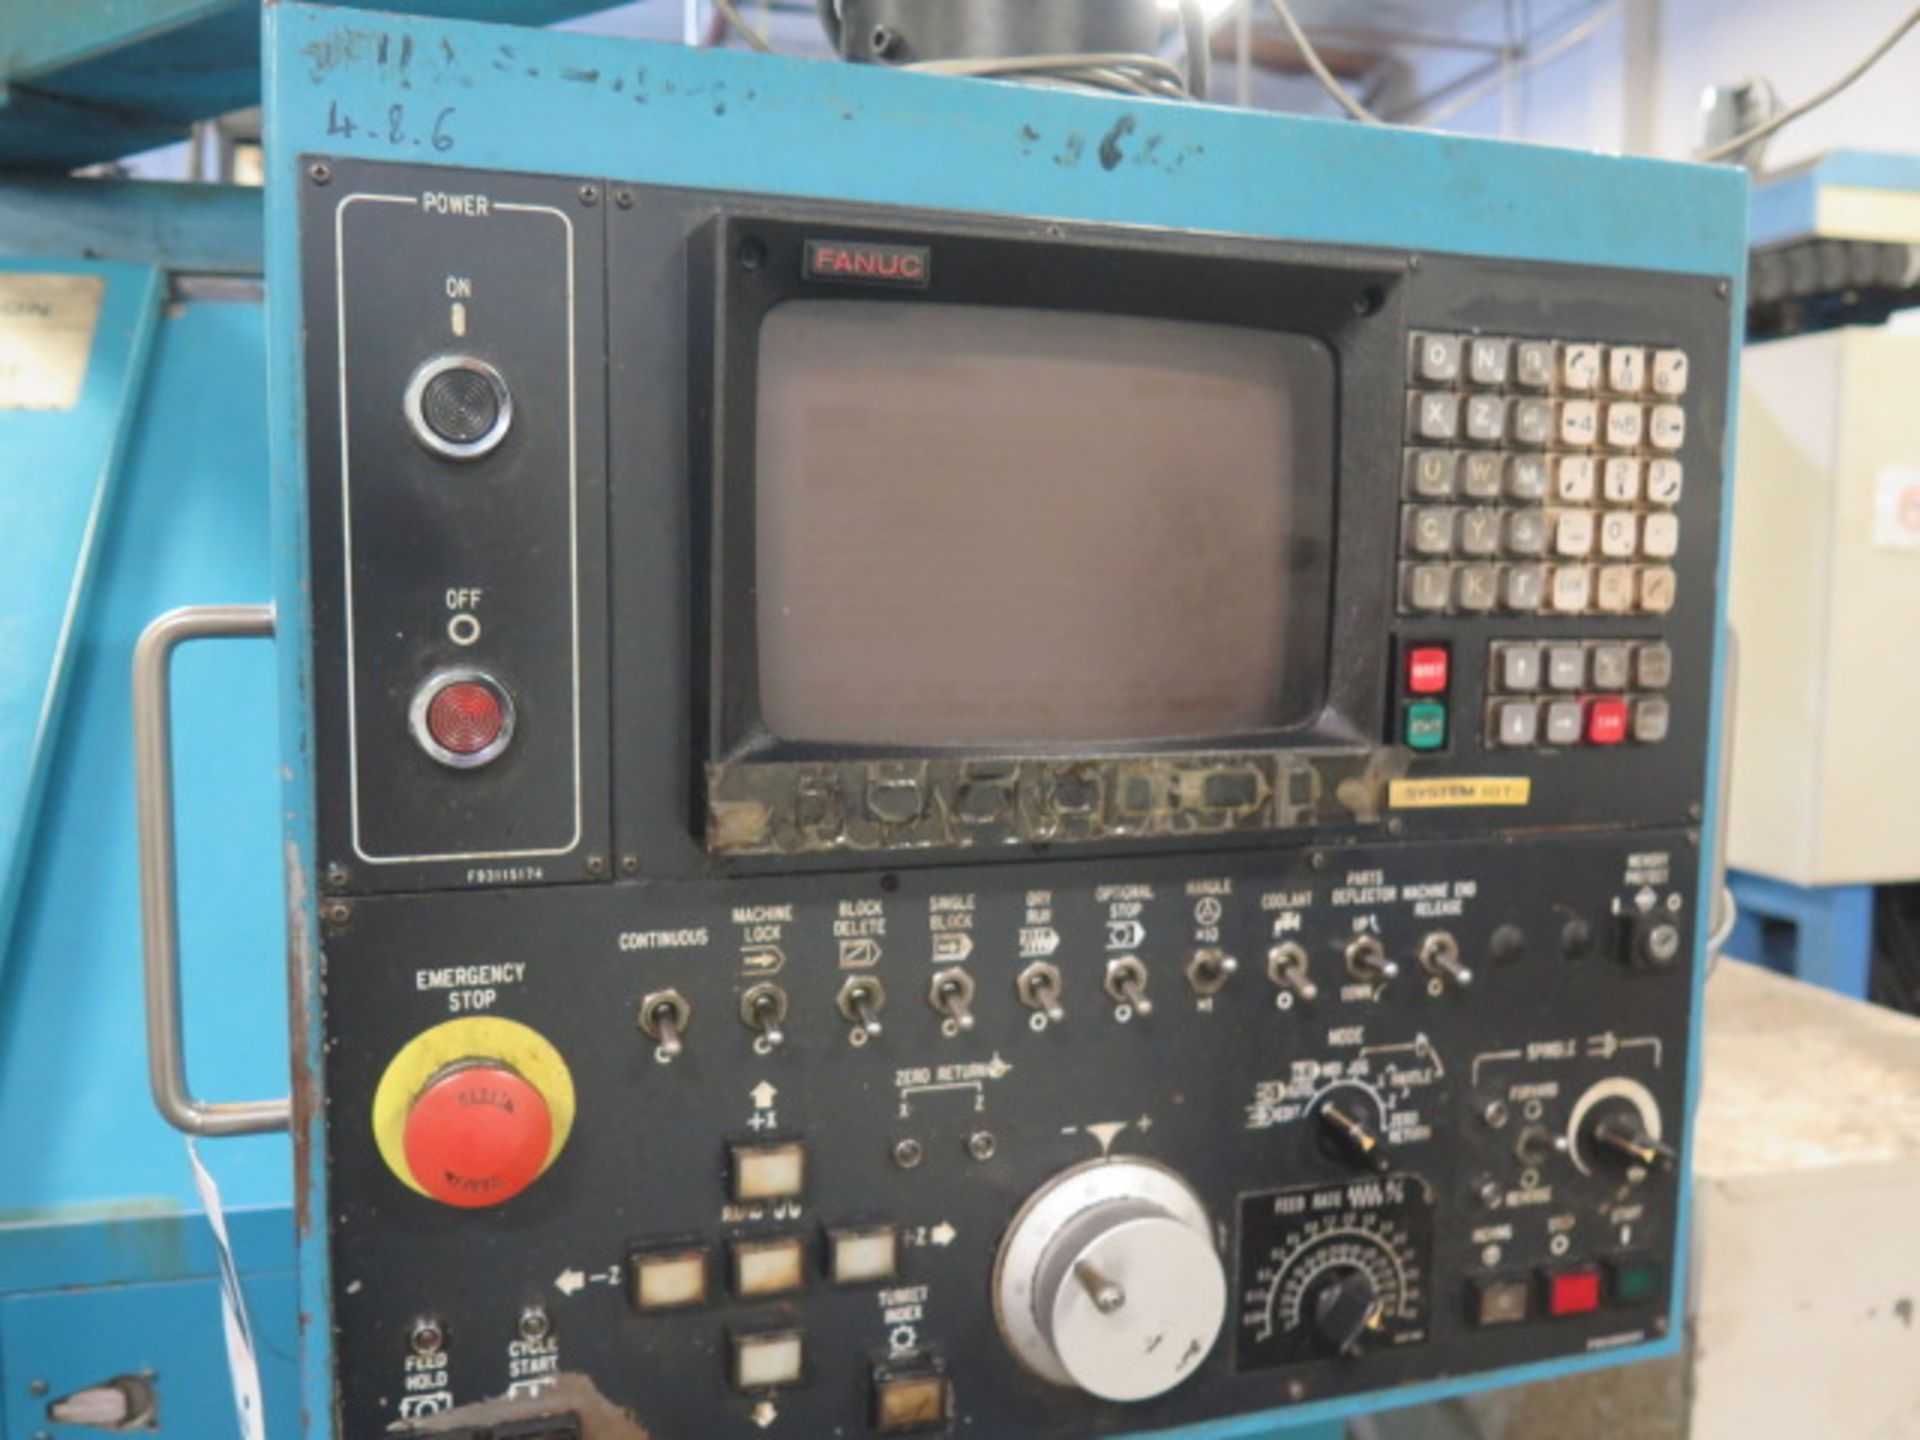 Miyano JNC-35 CNC Turning Center s/n JN350360 w/ Fanuc System 10T Controls, 8-Station, SOLD AS IS - Image 9 of 11